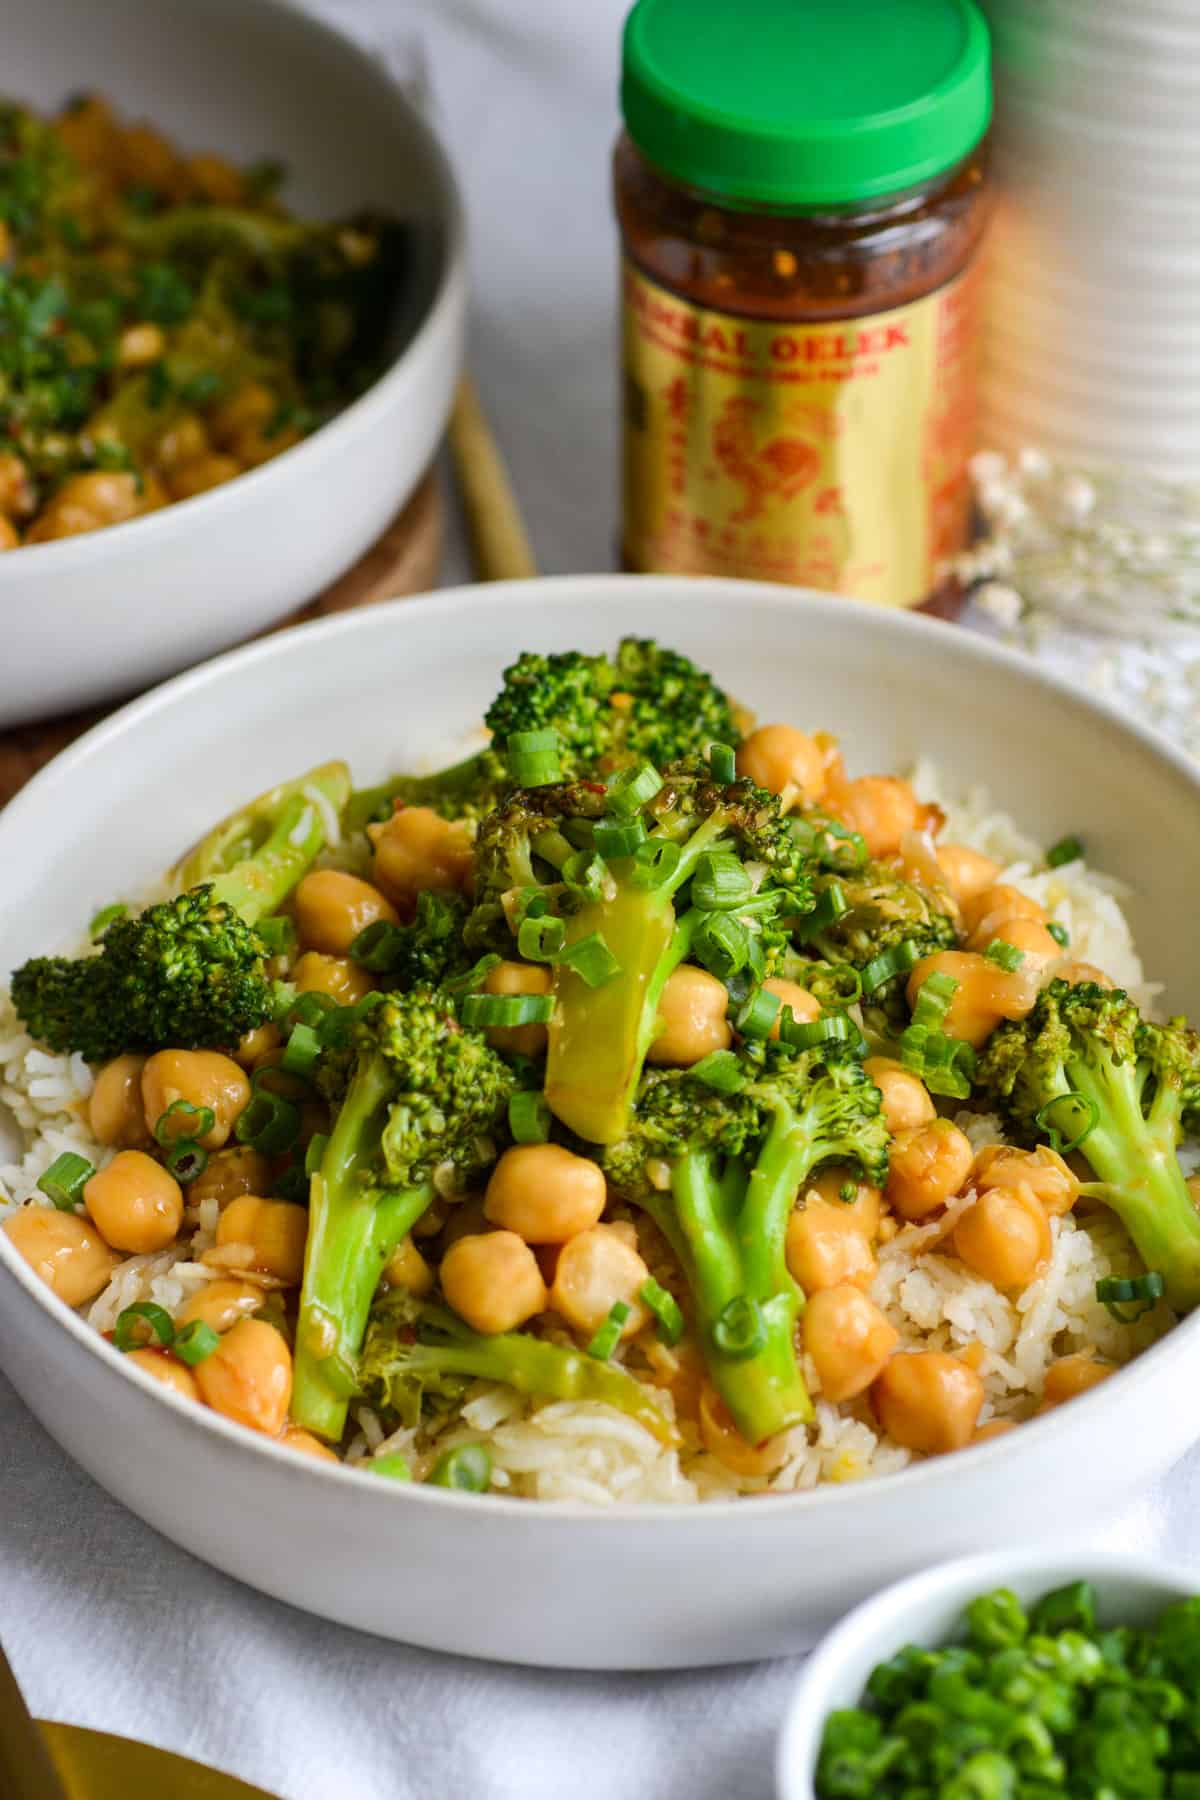 Vegan Chickpea Broccoli Stir Fry in a wide shallow bowl with a container of chili paste in the background.